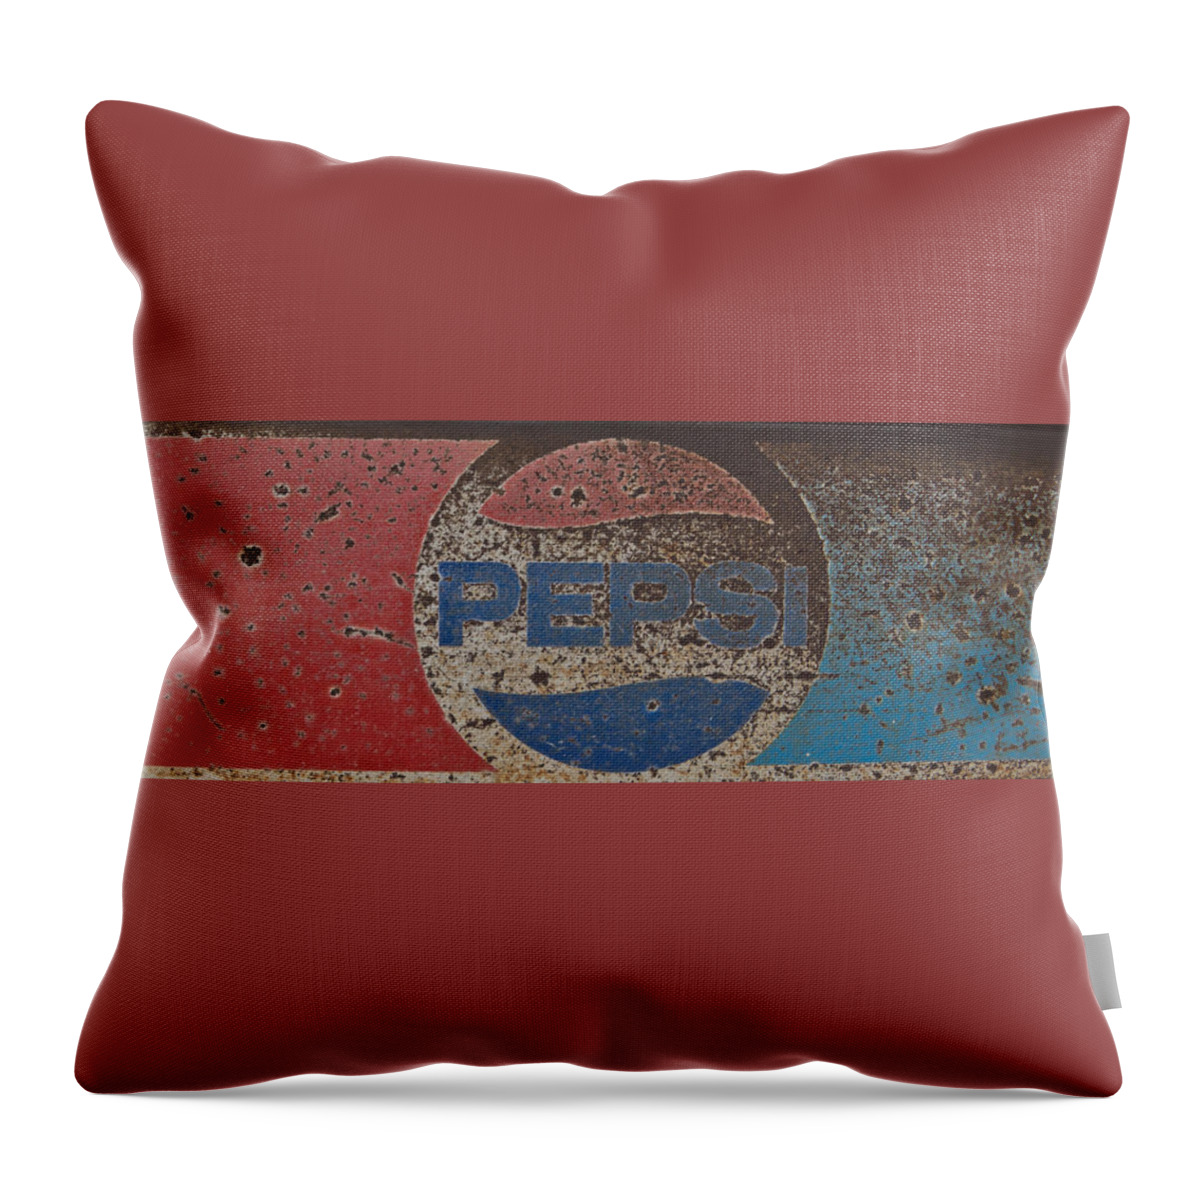 Pepsi Throw Pillow featuring the photograph A Little Tied But Still A Classic by Heidi Smith